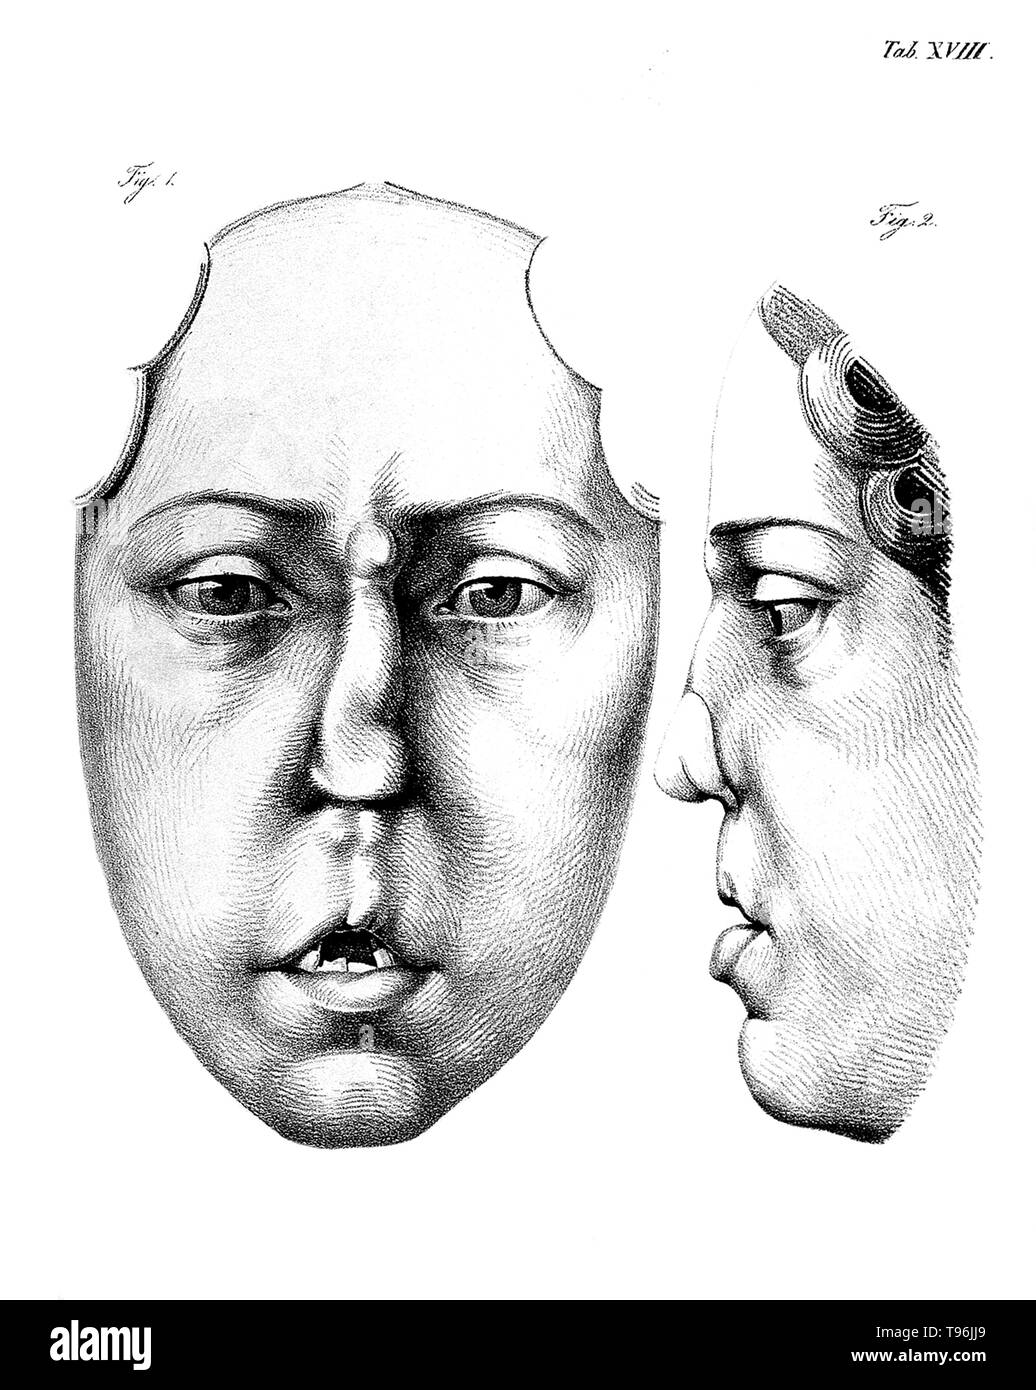 Chirurgische Erfahrungen. Front view and side view of woman paying particular attention to the nose. Johann Friedrich Dieffenbach (February  1, 1792 -  November 11, 1847) was a German surgeon who specialized in skin transplantation and plastic surgery. His work in rhinoplastic and maxillofacial surgery established many modern techniques of reconstructive surgery. Before the discovery of blood typing and blood matching, Dieffenbach researched blood transfusion. Stock Photo